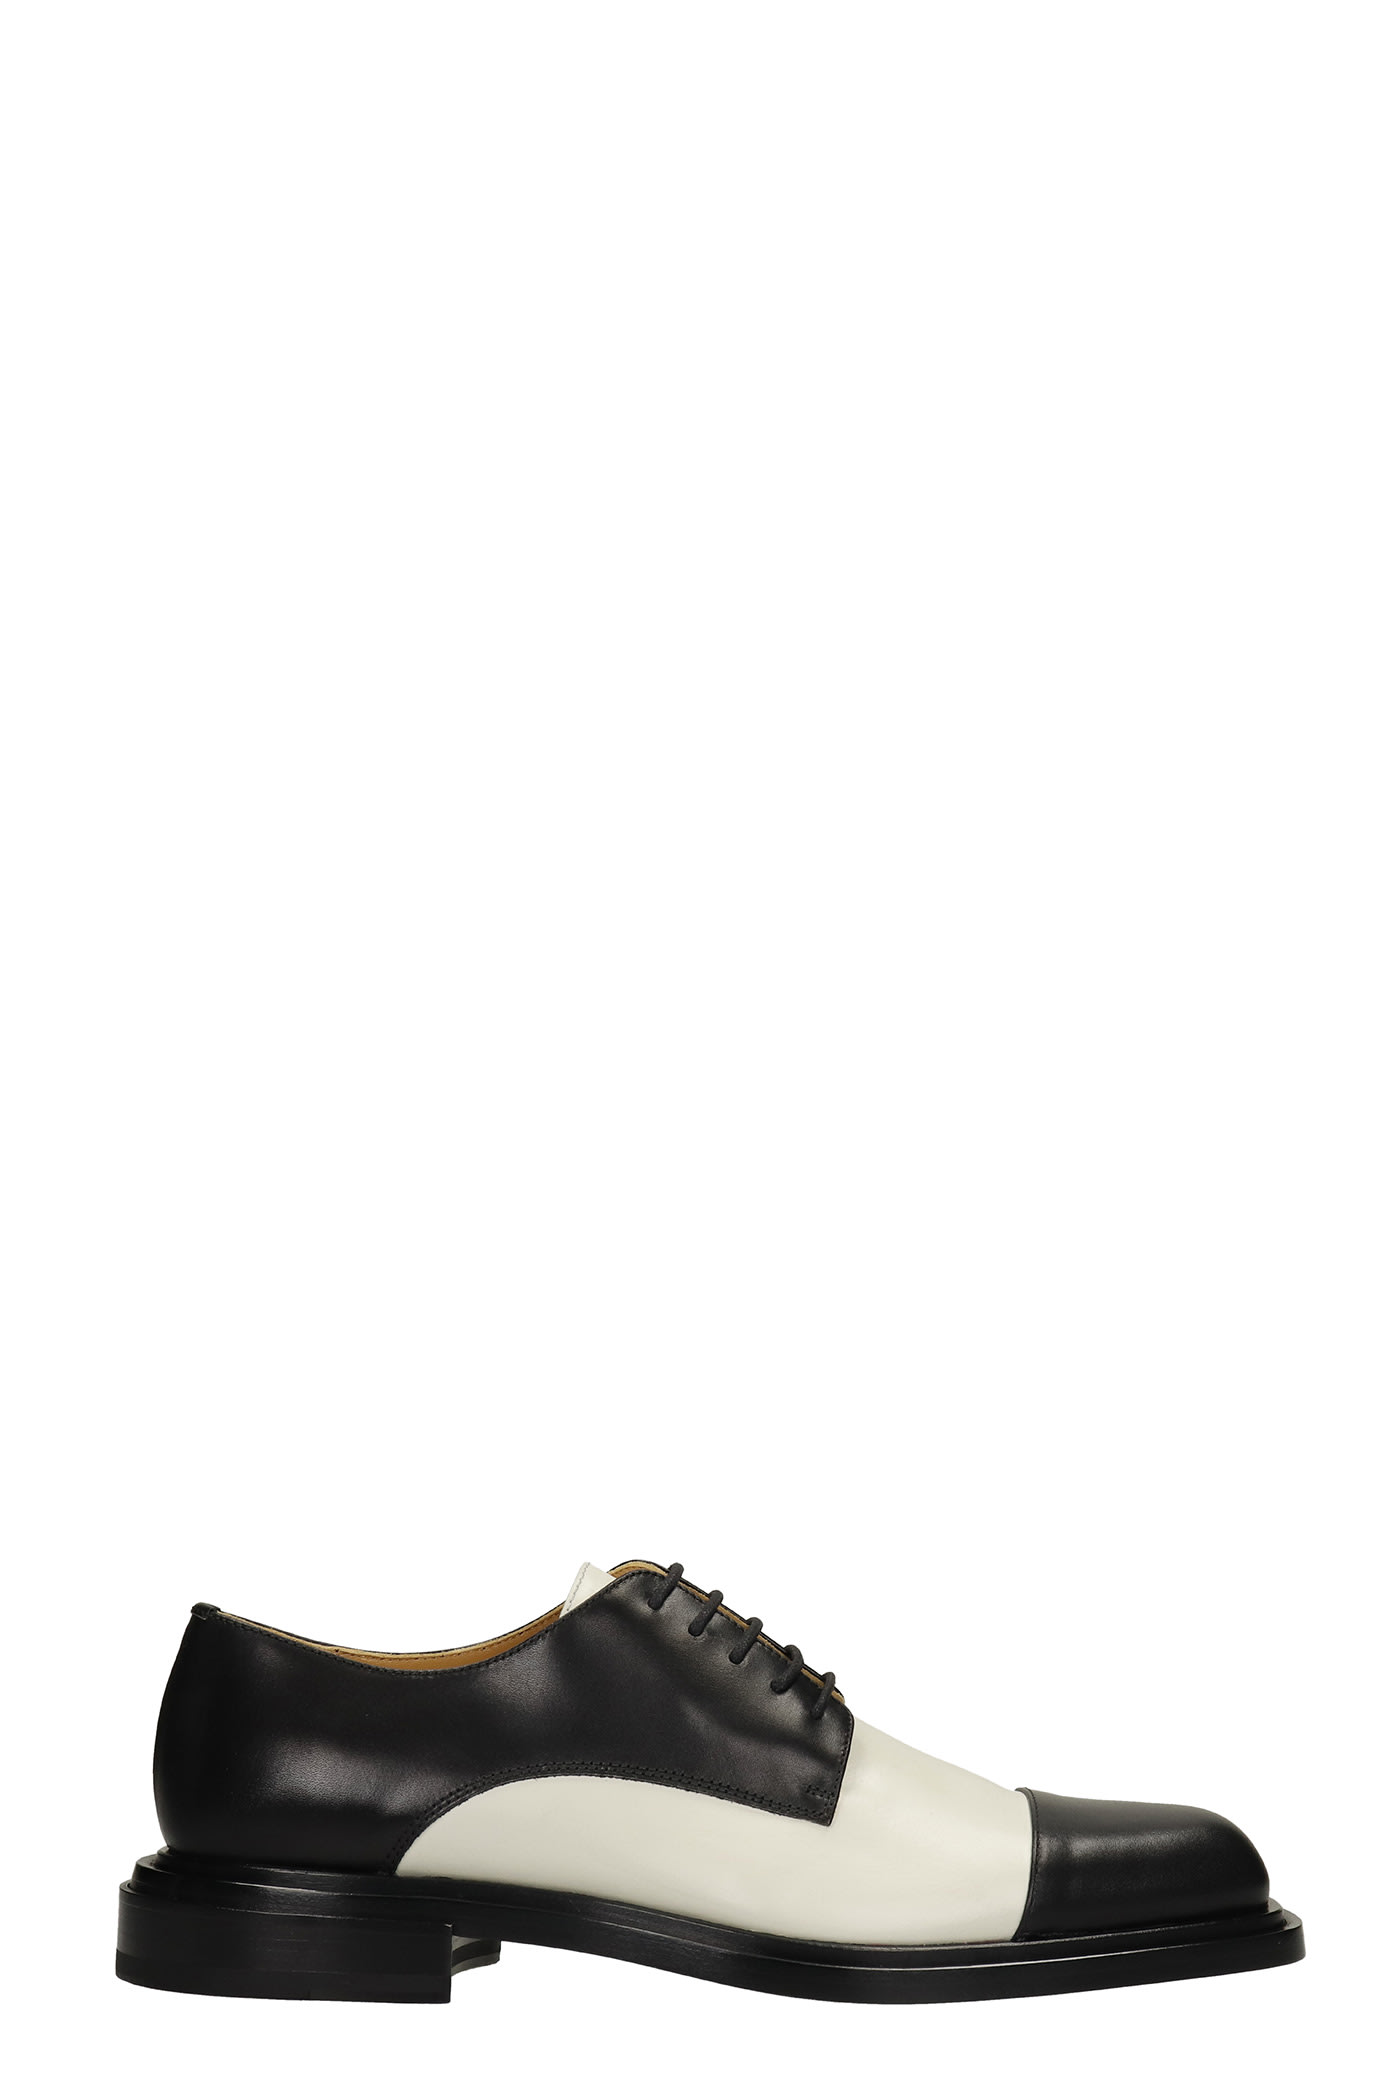 Cesare Paciotti Lace Up Shoes In Black Leather